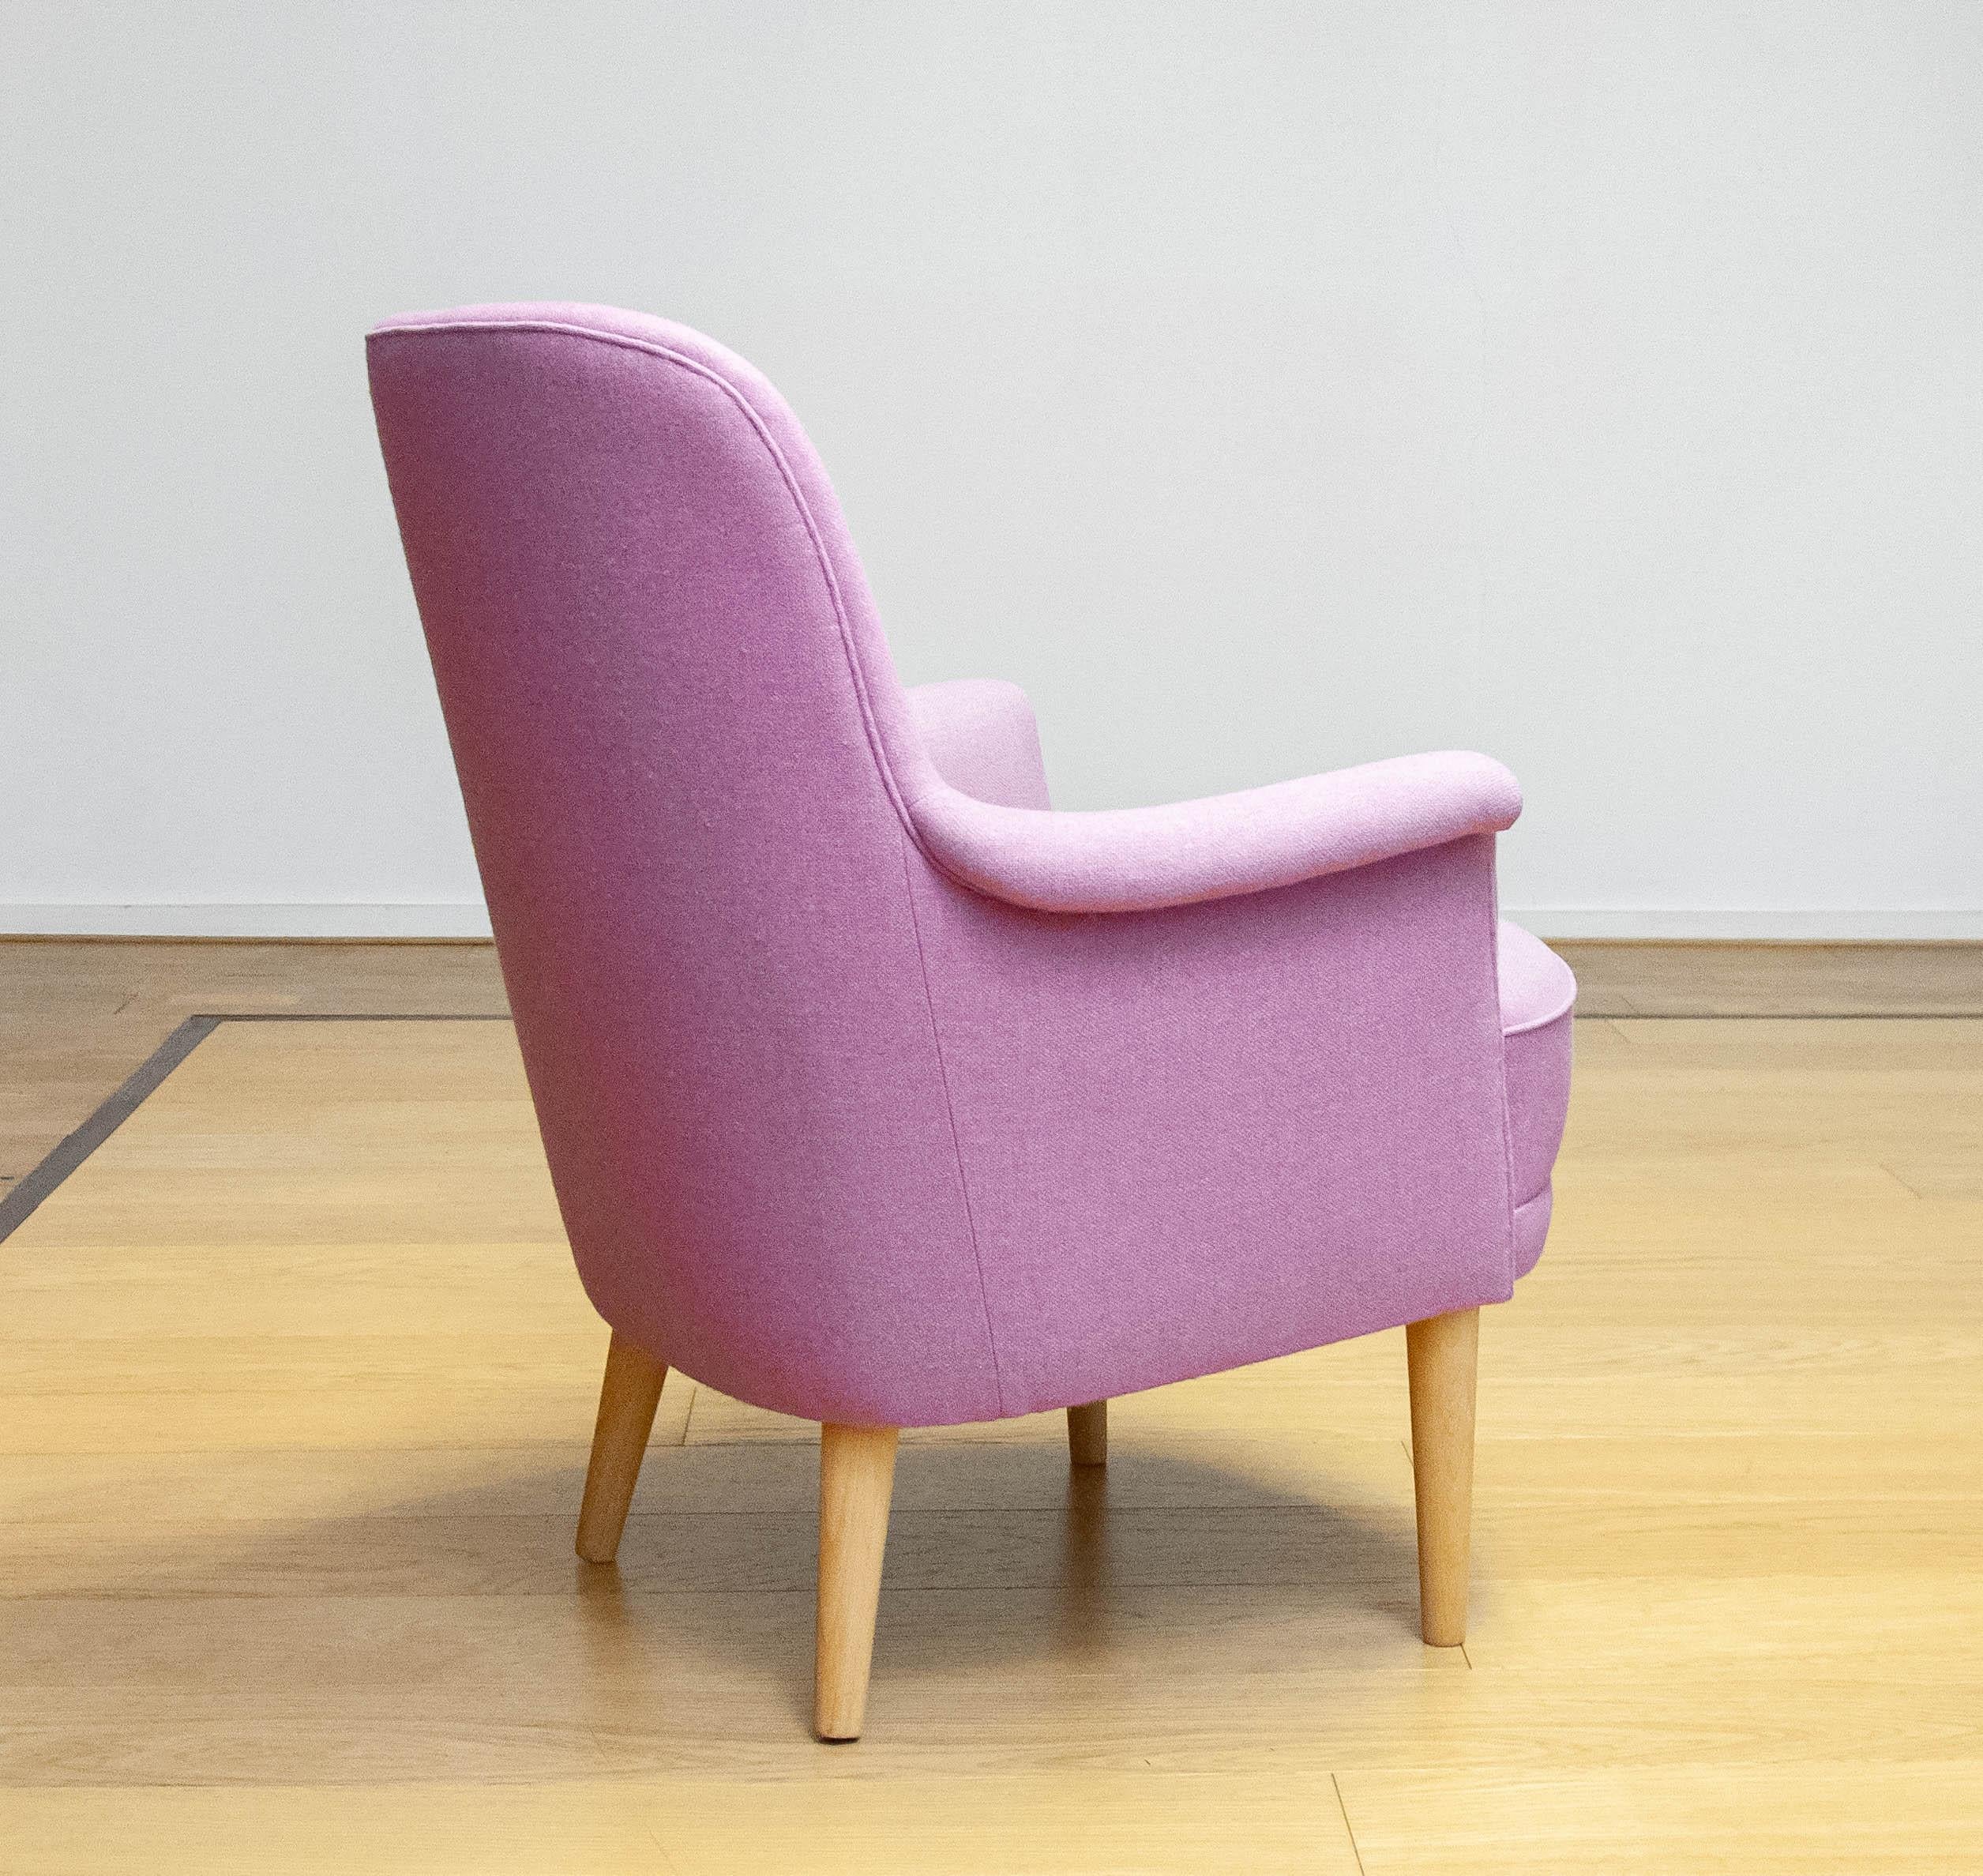 1950s Upholstered With Lilac Wool Armchair By Carl Malmsten For O.H. Sjogren. For Sale 2